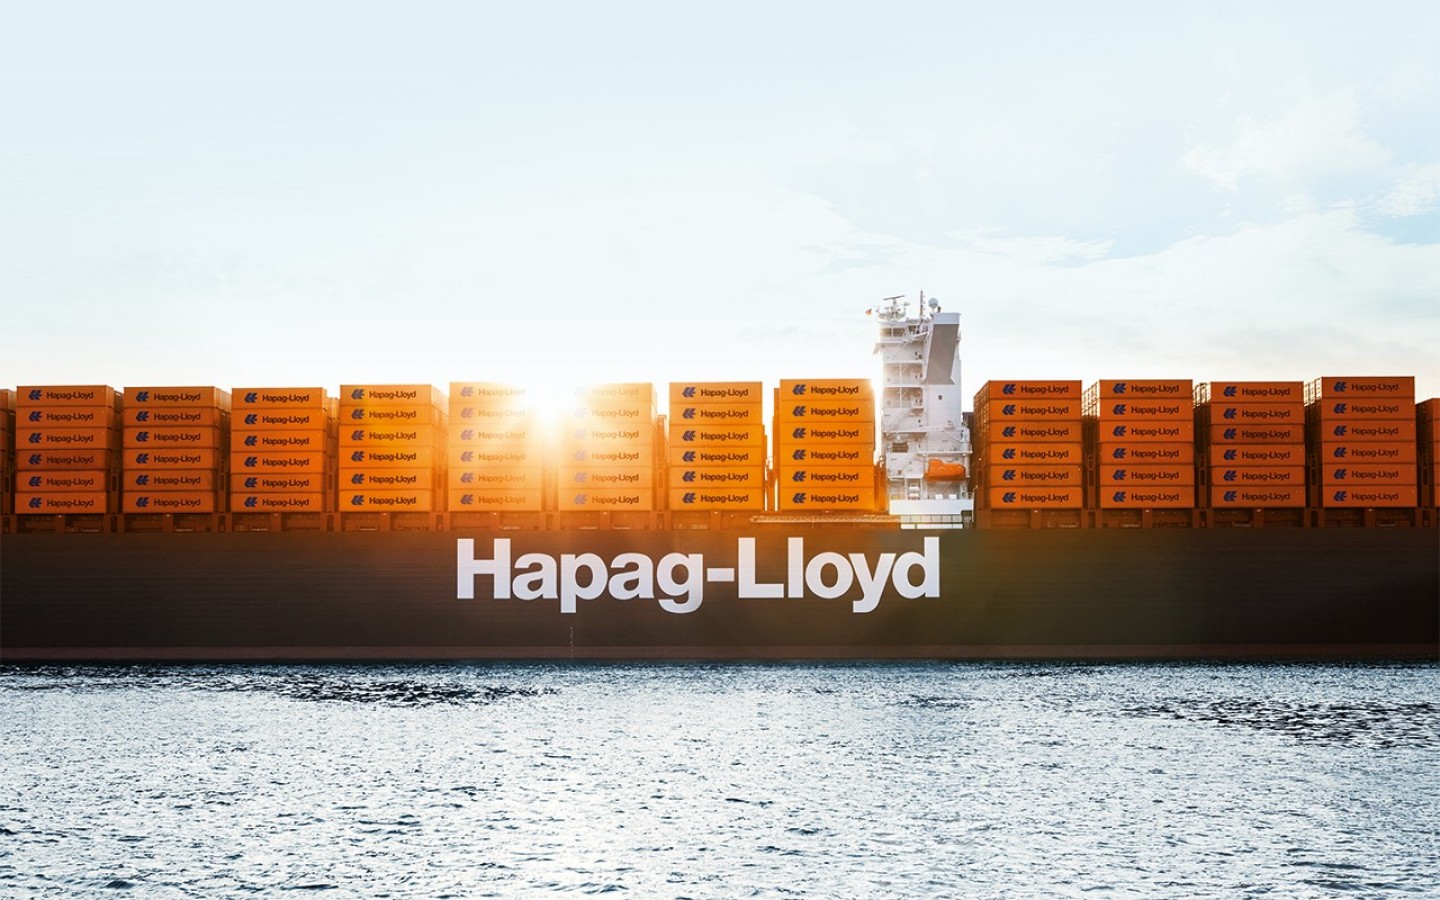 Engine manufacturer MAN to supply six main engines for Hapag-Lloyd